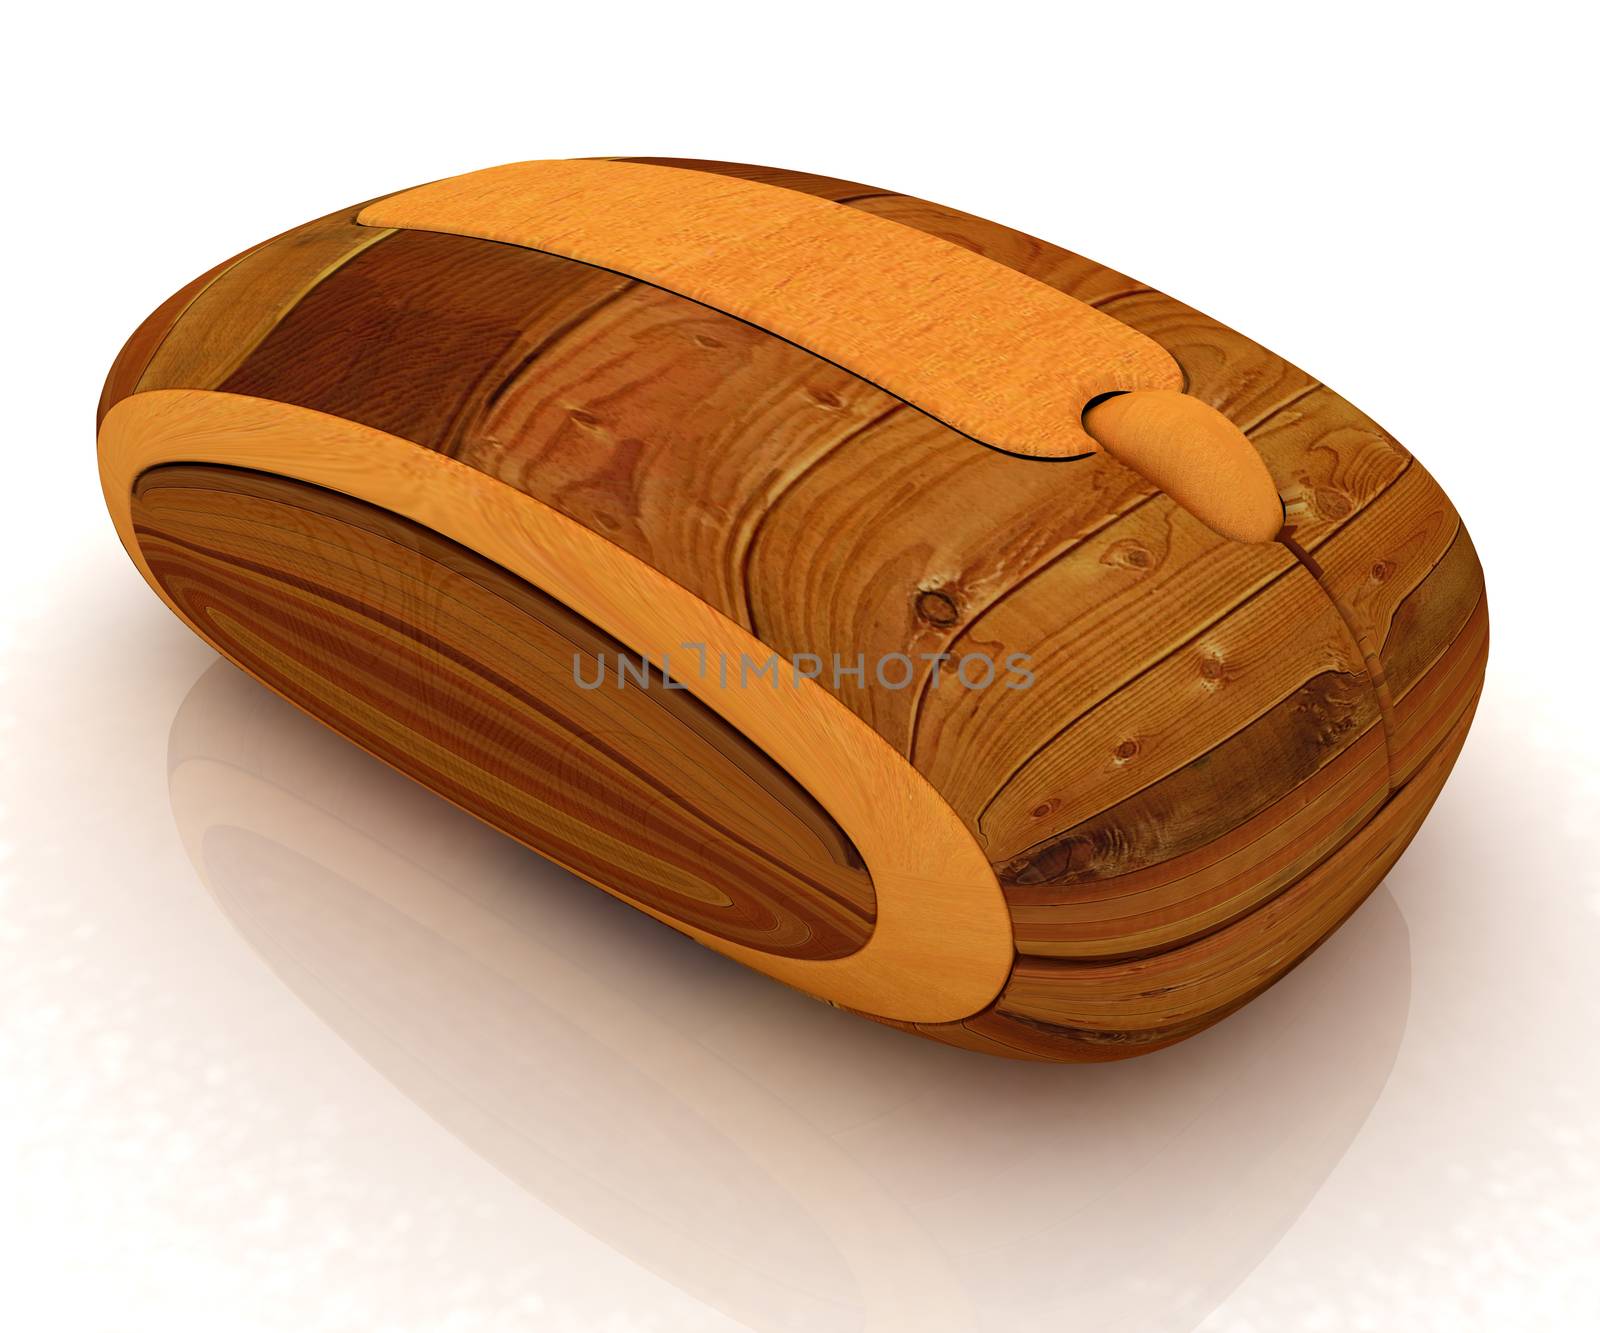 Wooden computer mouse on white background